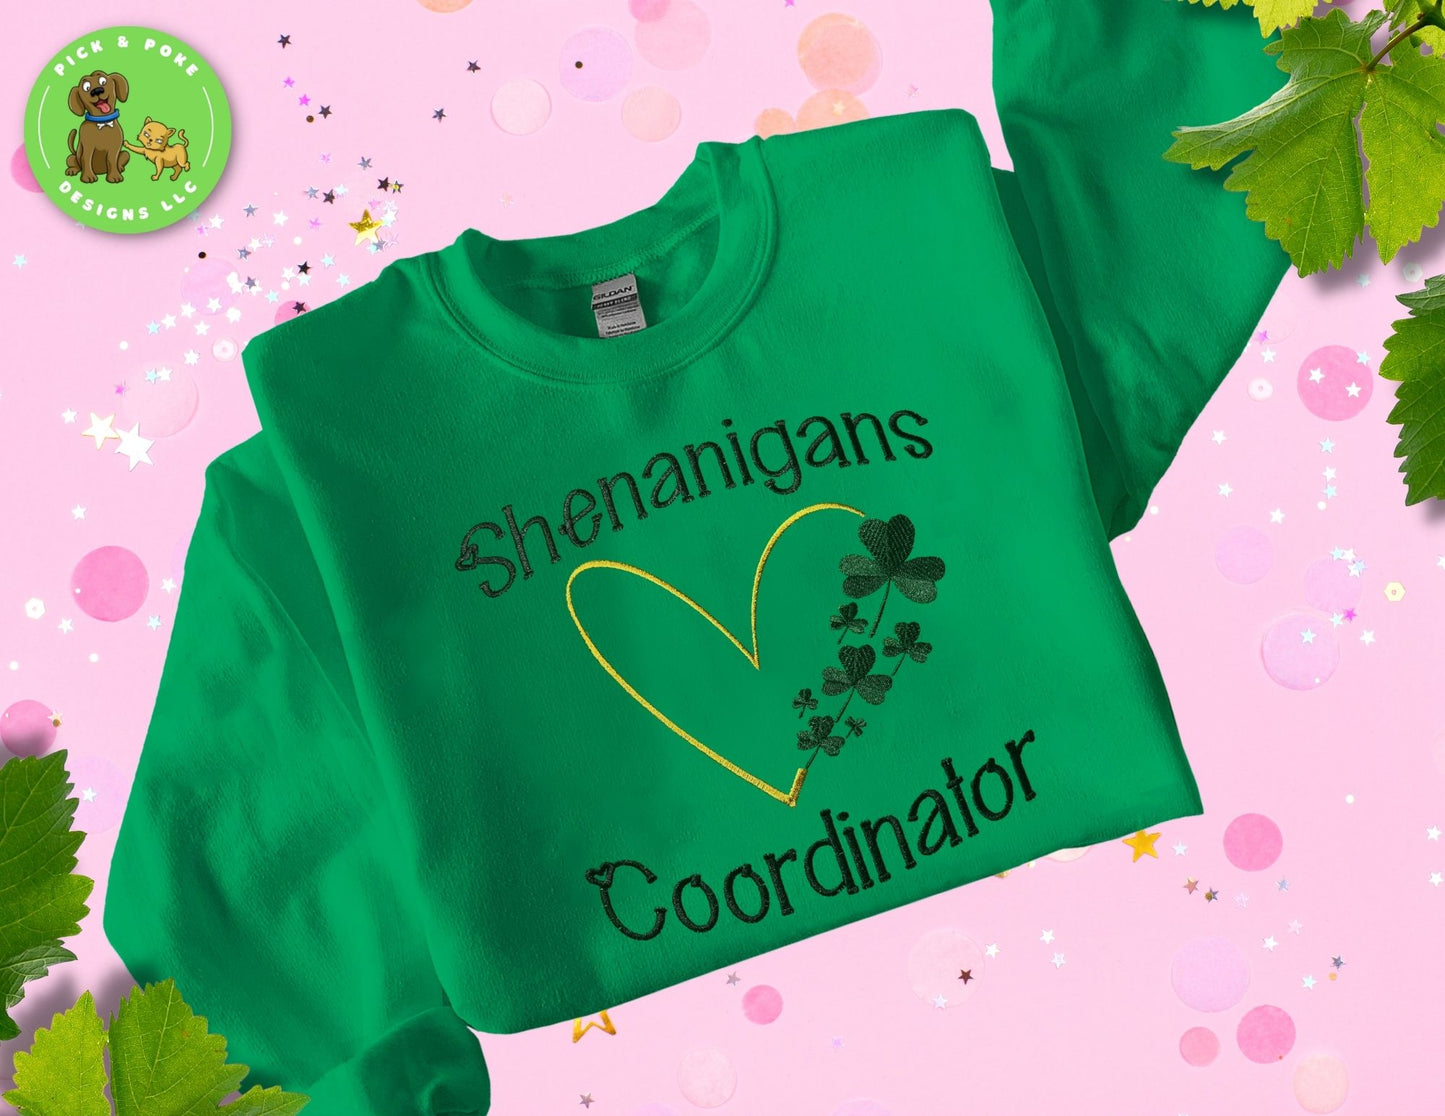 A vibrant green crewneck sweatshirt with gold embroidery featuring the words "Shenanigans Coordinator" and a heart made of clovers. The crewneck is laid out on a pink background, ready to be worn and styled by any fun-loving teacher.